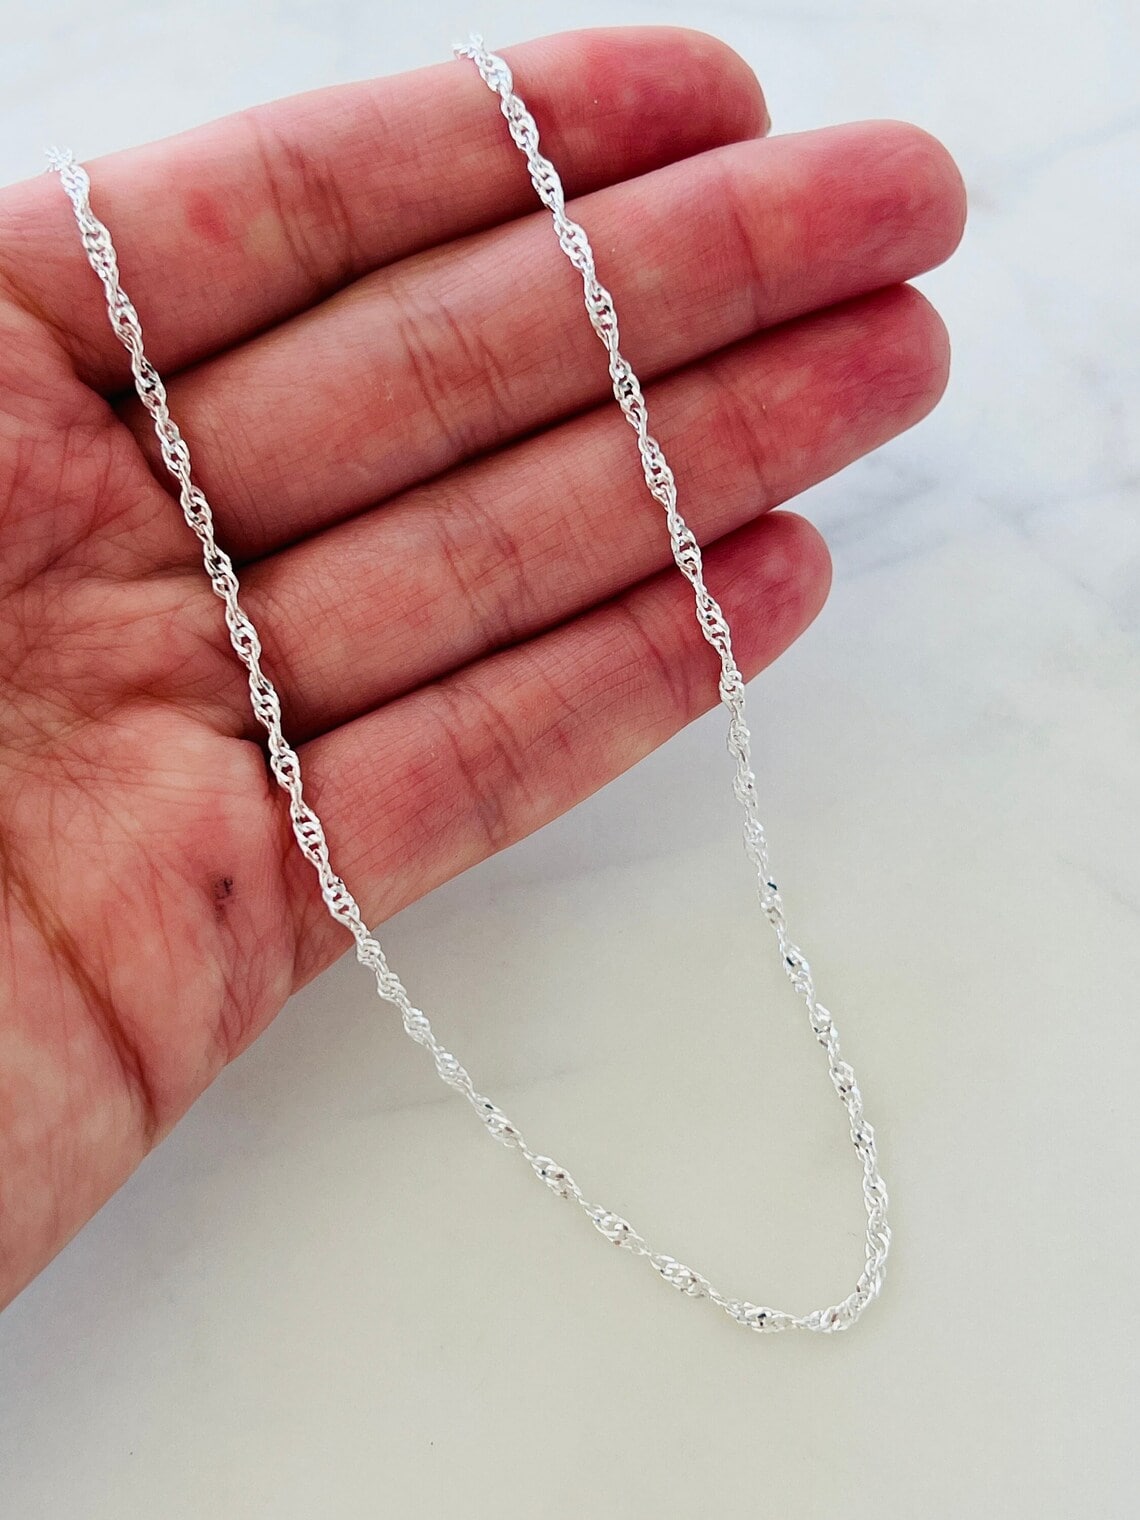 sterling silver singapore chain necklace on the hand